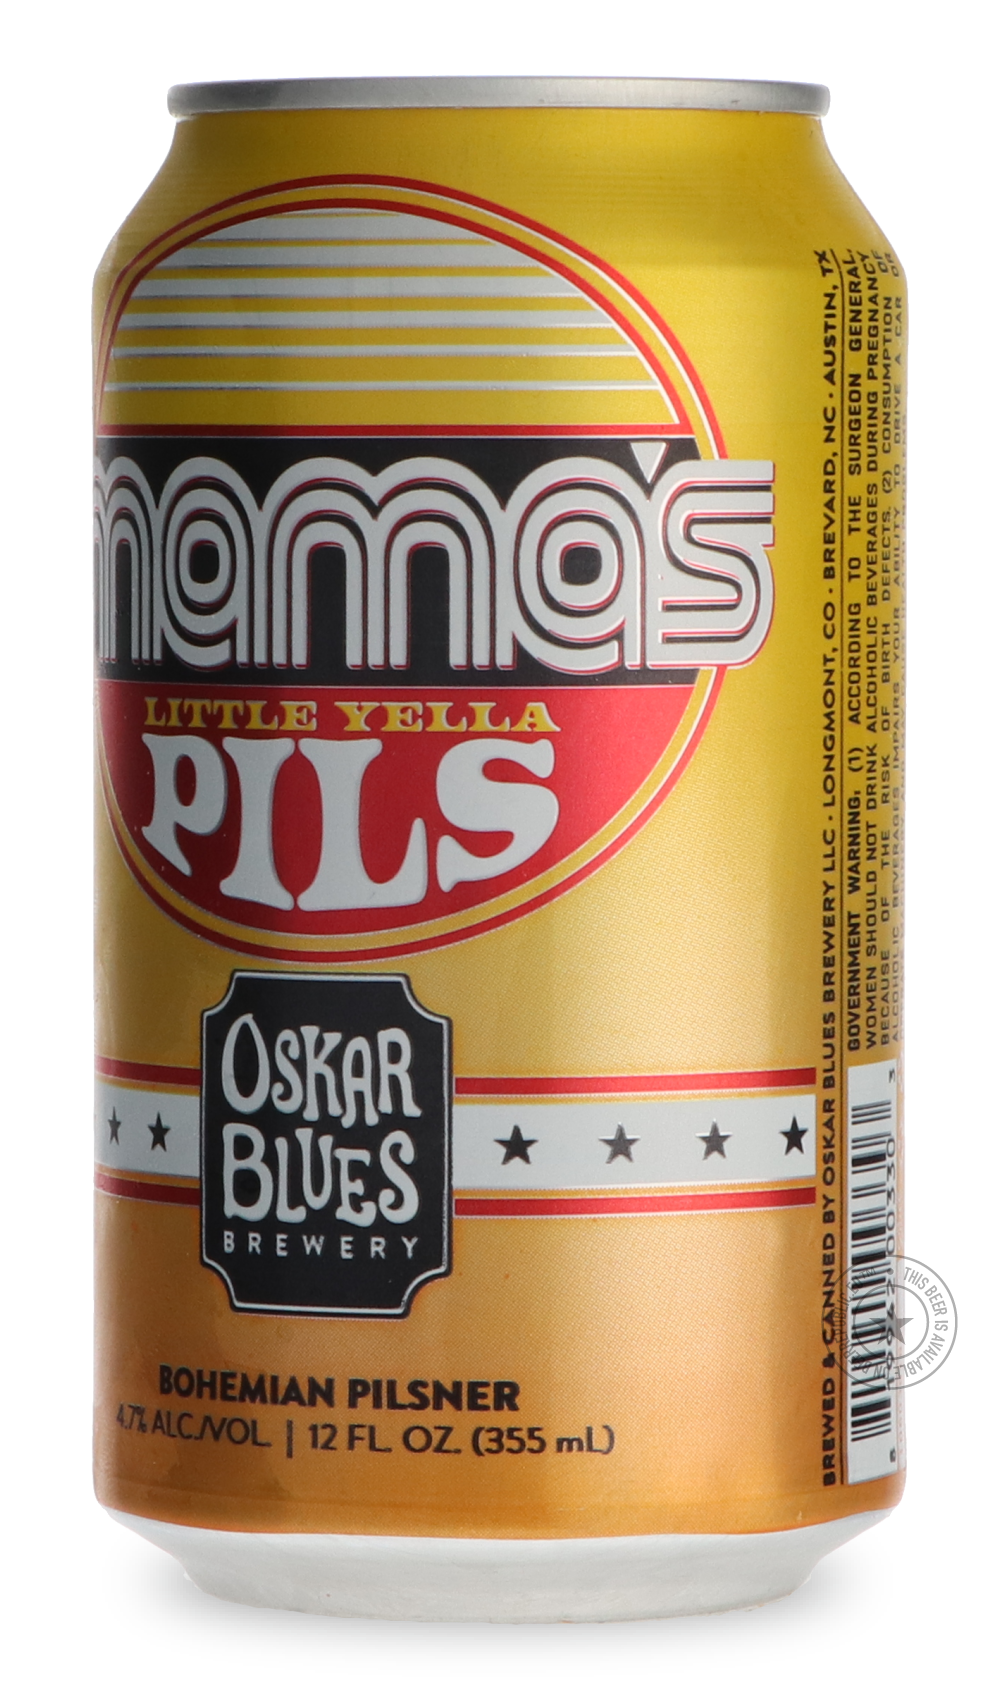 -Oskar Blues- Mama's Little Yella-Pale- Only @ Beer Republic - The best online beer store for American & Canadian craft beer - Buy beer online from the USA and Canada - Bier online kopen - Amerikaans bier kopen - Craft beer store - Craft beer kopen - Amerikanisch bier kaufen - Bier online kaufen - Acheter biere online - IPA - Stout - Porter - New England IPA - Hazy IPA - Imperial Stout - Barrel Aged - Barrel Aged Imperial Stout - Brown - Dark beer - Blond - Blonde - Pilsner - Lager - Wheat - Weizen - Amber 